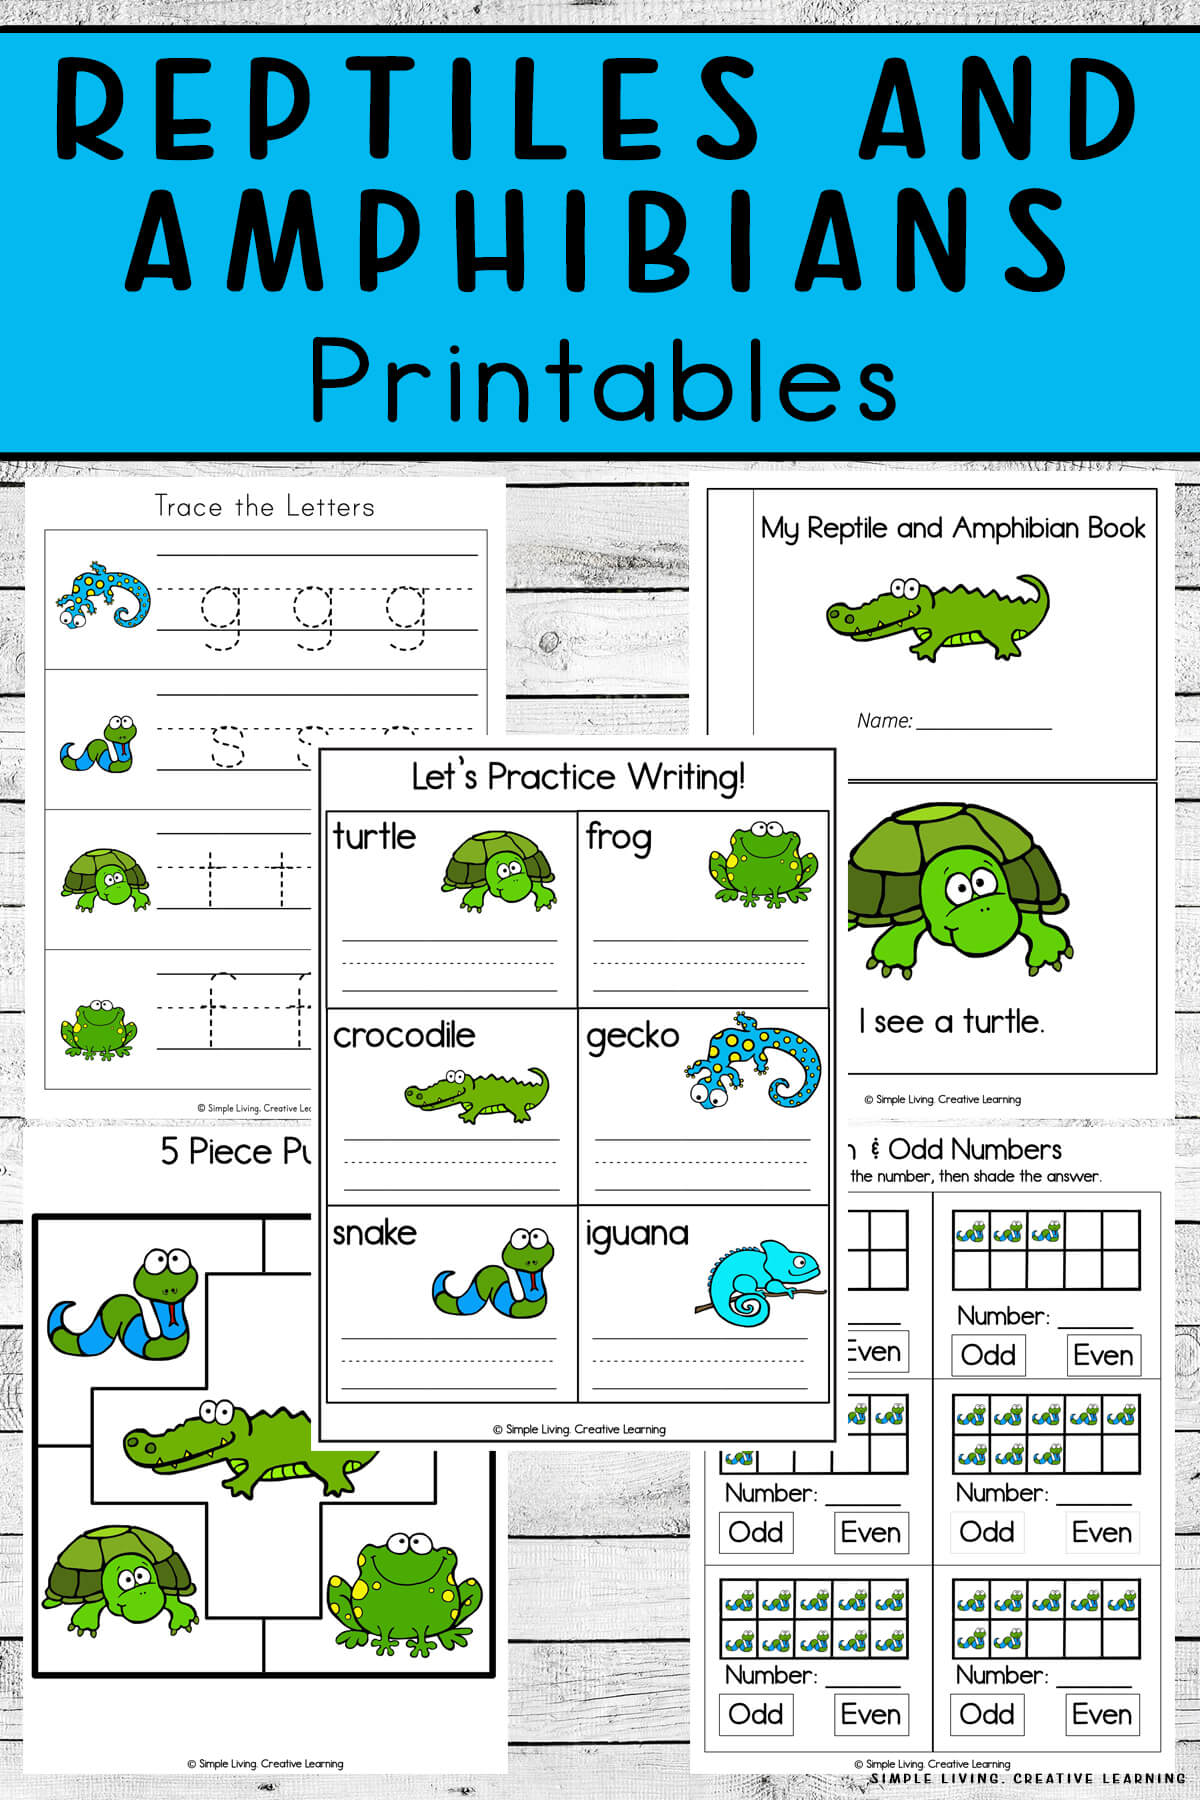 Reptiles and Amphibians Printables